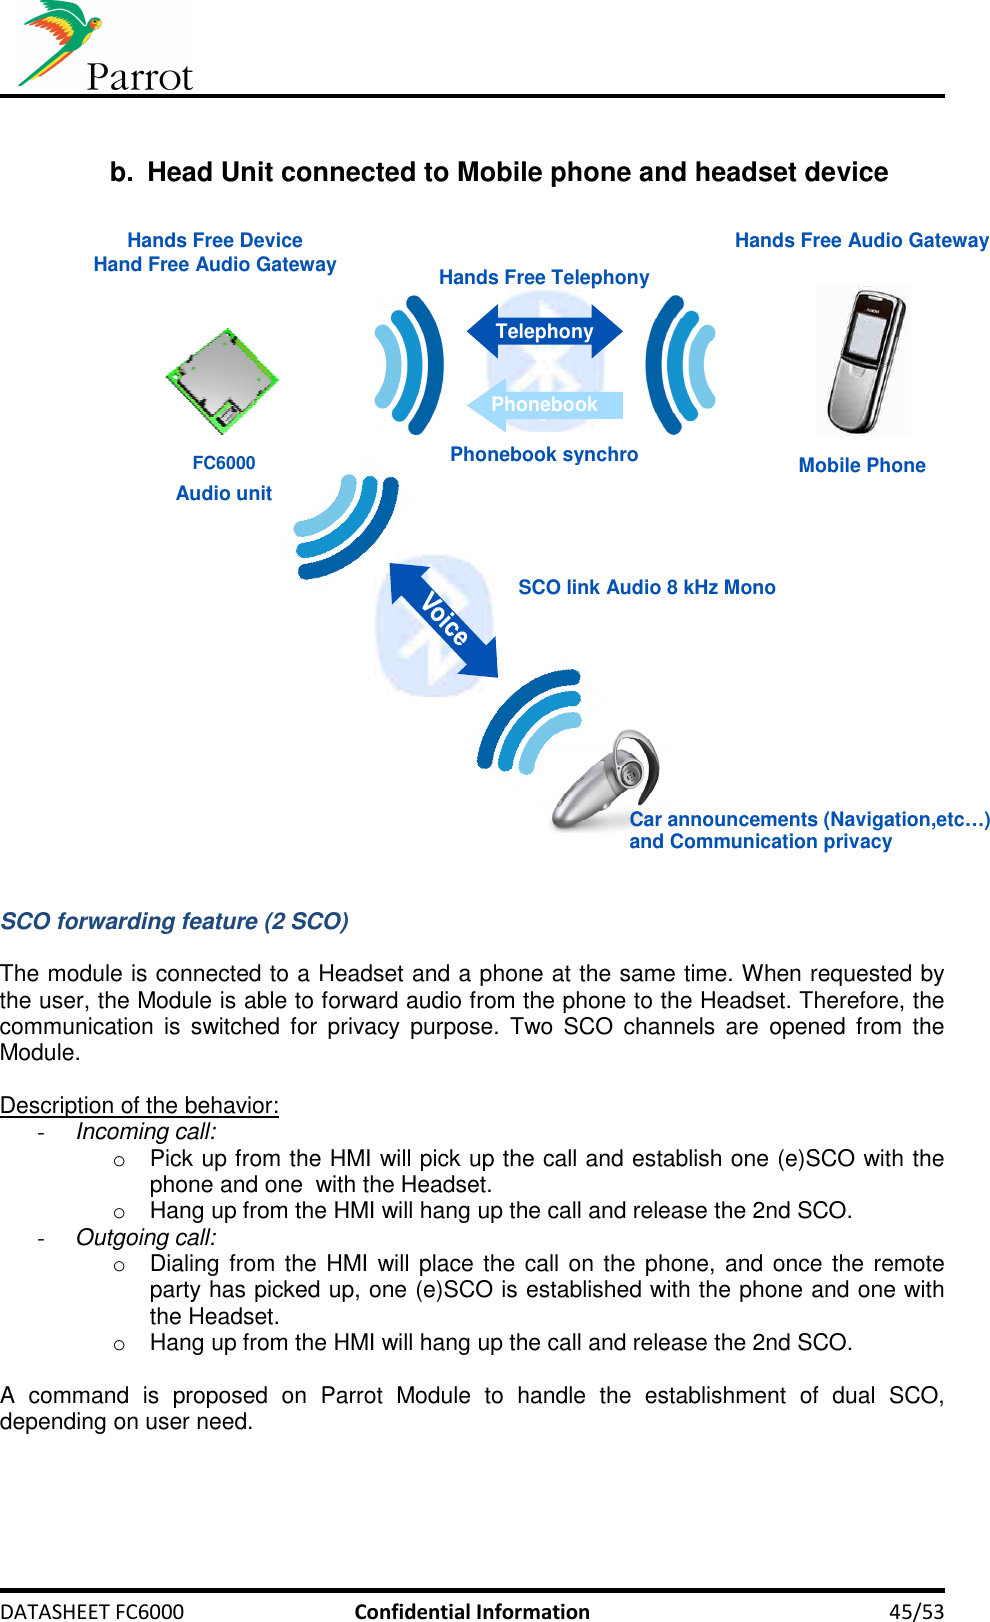     DATASHEET FC6000  Confidential Information  45/53  b.  Head Unit connected to Mobile phone and headset device   SCO link Audio 8 kHz Mono Car announcements (Navigation,etc…)  and Communication privacy Hands Free Audio Gateway Hands Free Device Hand Free Audio GatewayMobile PhoneHands Free TelephonyPhonebook synchroTelephonyPhonebookAudio unitFC6000  SCO forwarding feature (2 SCO)  The module is connected to a Headset and a phone at the same time. When requested by the user, the Module is able to forward audio from the phone to the Headset. Therefore, the communication is switched  for  privacy  purpose.  Two  SCO  channels are  opened  from  the Module.  Description of the behavior: - Incoming call: o  Pick up from the HMI will pick up the call and establish one (e)SCO with the phone and one  with the Headset. o  Hang up from the HMI will hang up the call and release the 2nd SCO. - Outgoing call: o  Dialing from the HMI will place the call on the phone, and once the remote party has picked up, one (e)SCO is established with the phone and one with the Headset. o  Hang up from the HMI will hang up the call and release the 2nd SCO.  A  command  is  proposed  on  Parrot  Module  to  handle  the  establishment  of  dual  SCO, depending on user need. 